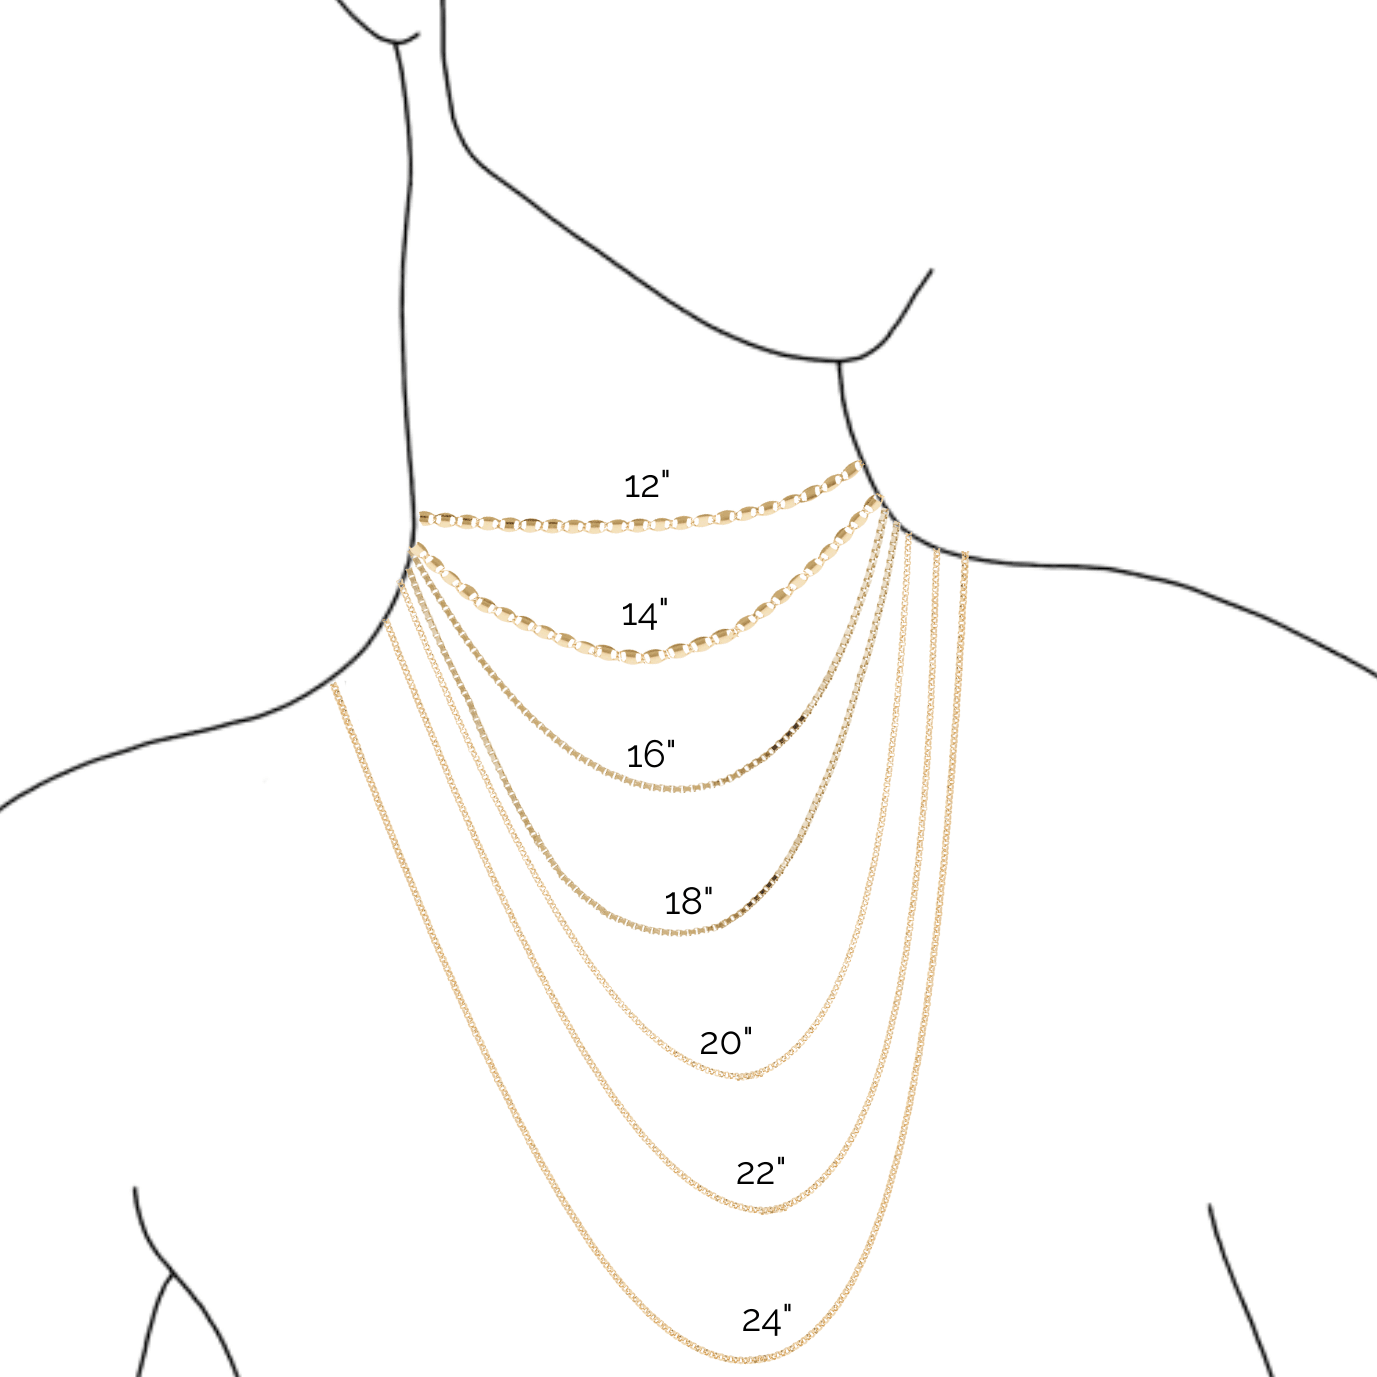 necklace inch chart, how long is 16inch? how long is 18inch? inch chart necklaces